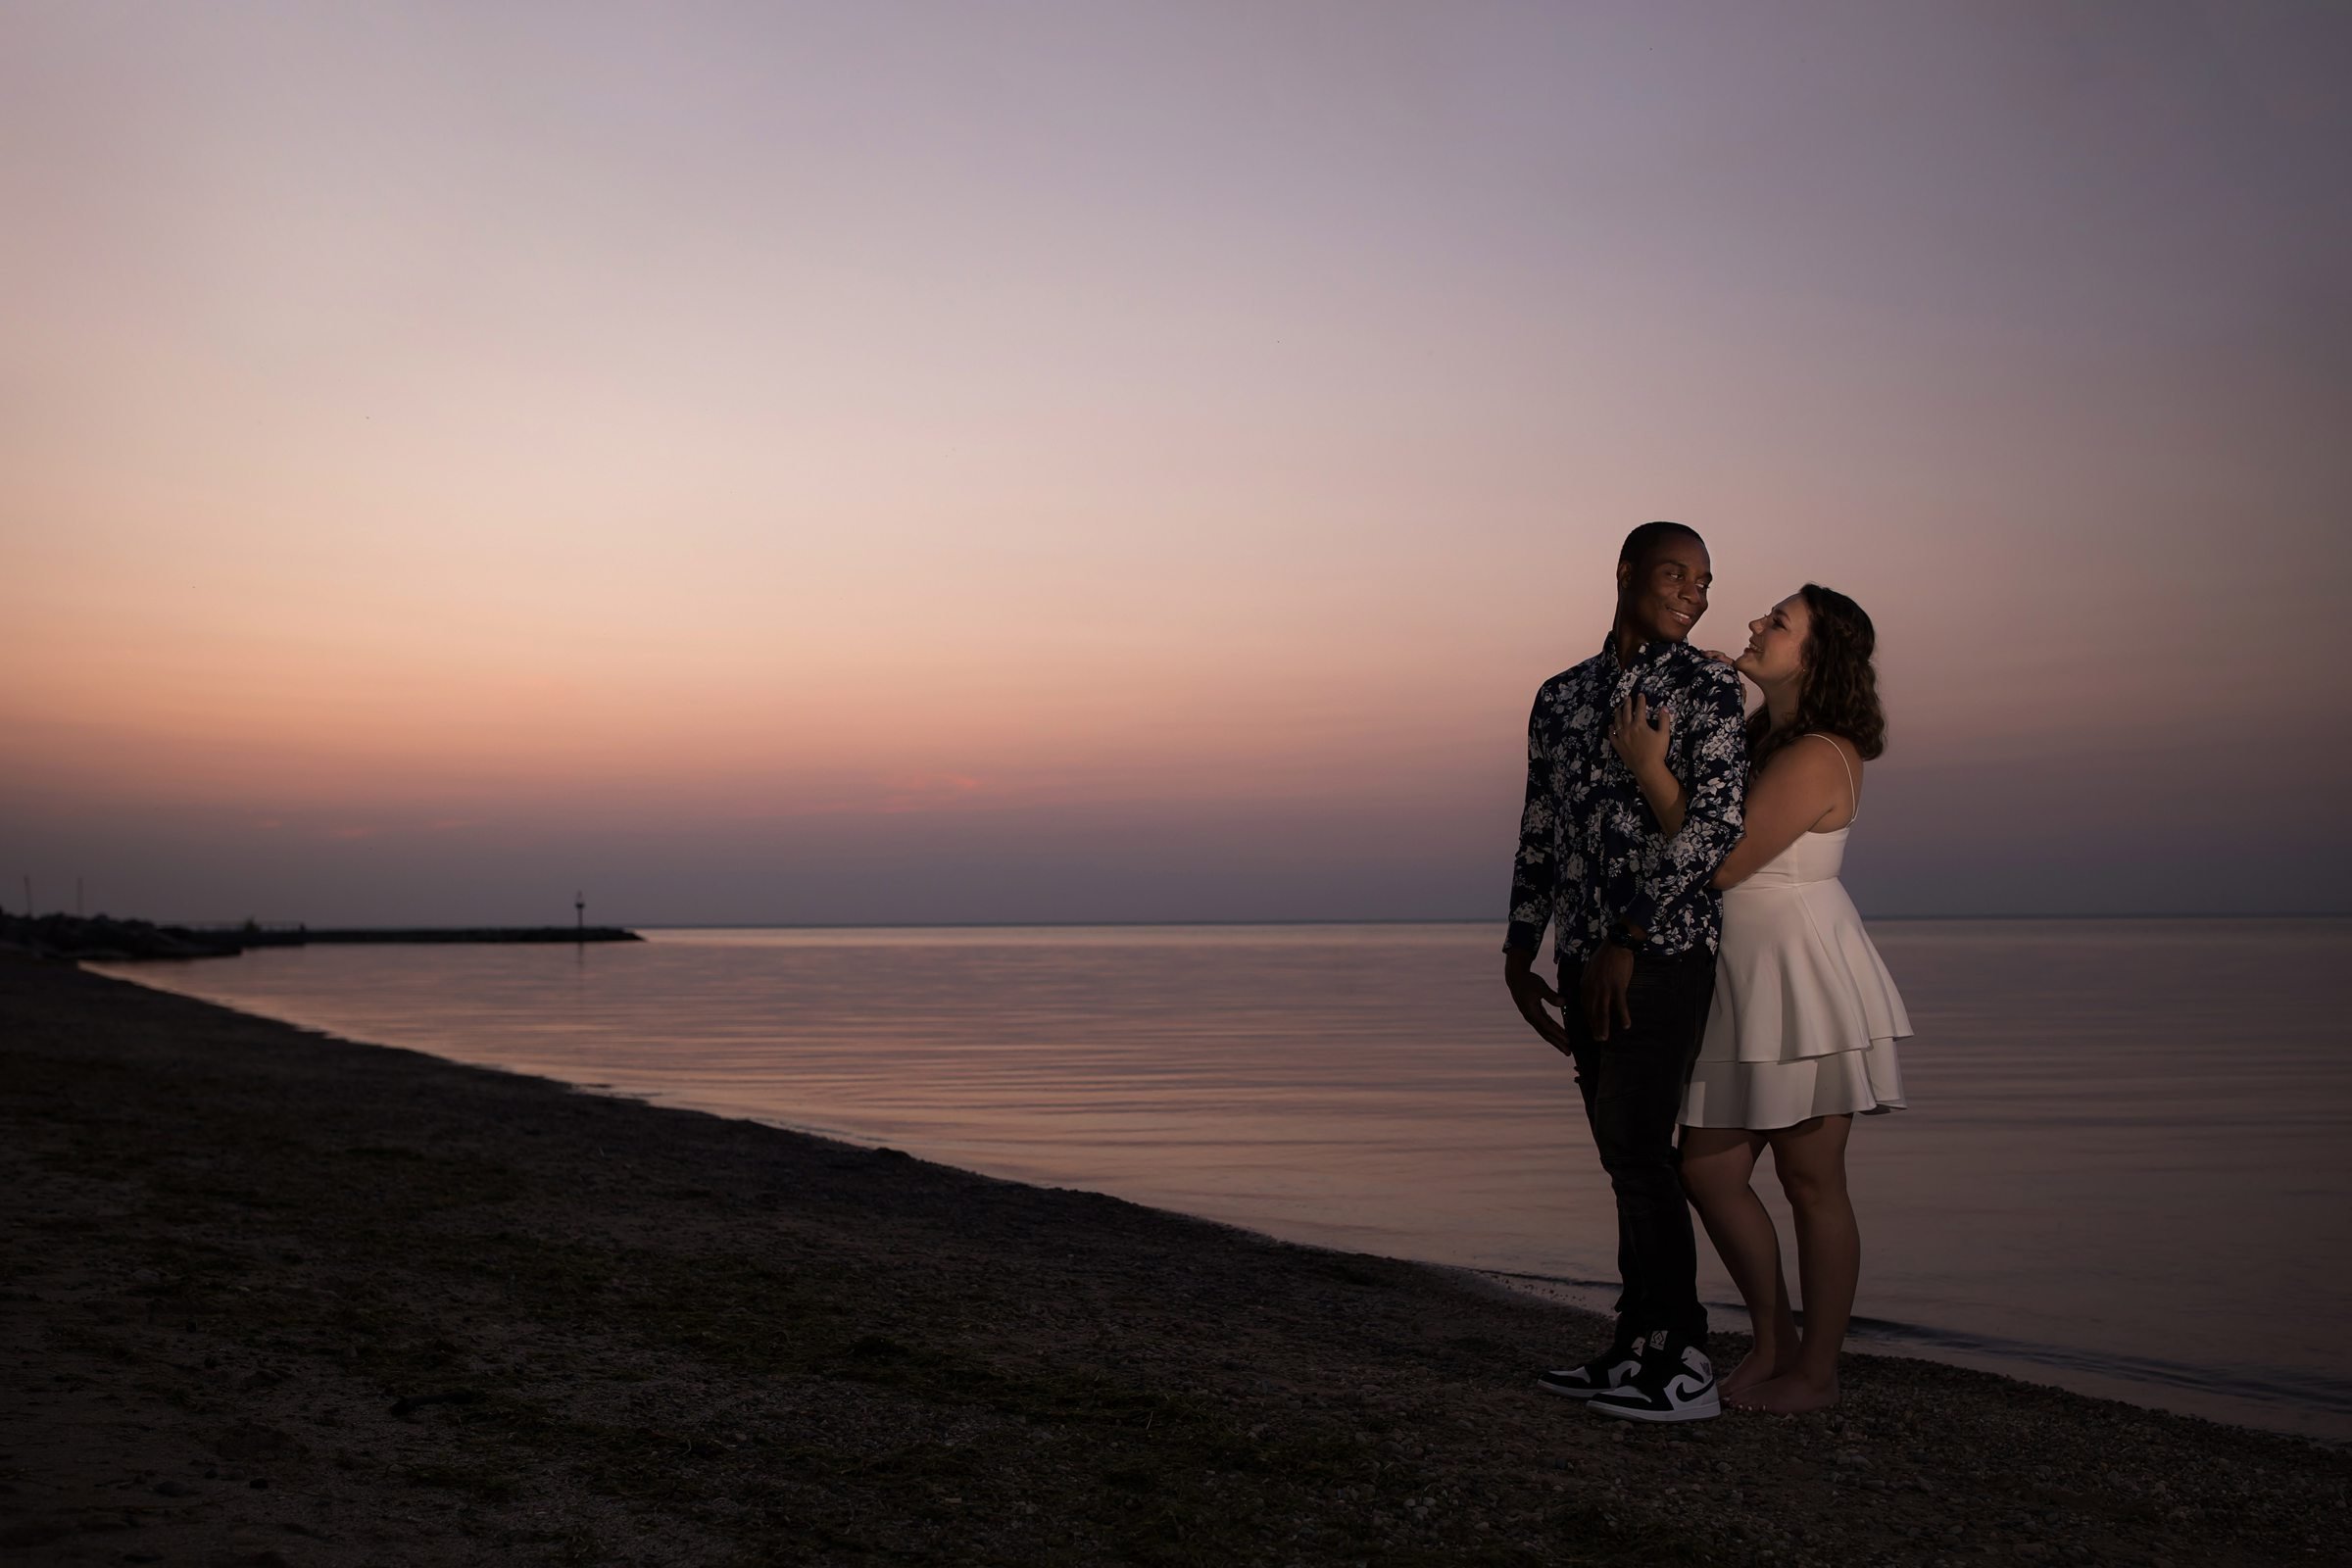  We moved down to the dock area to get that perfect view of the Bay of Green Bay and the sunset.&nbsp; I utilized a mixture of natural light and OCF (off camera flash) to capture the various looks of the sunset.&nbsp; Once the sun had set I chose a t